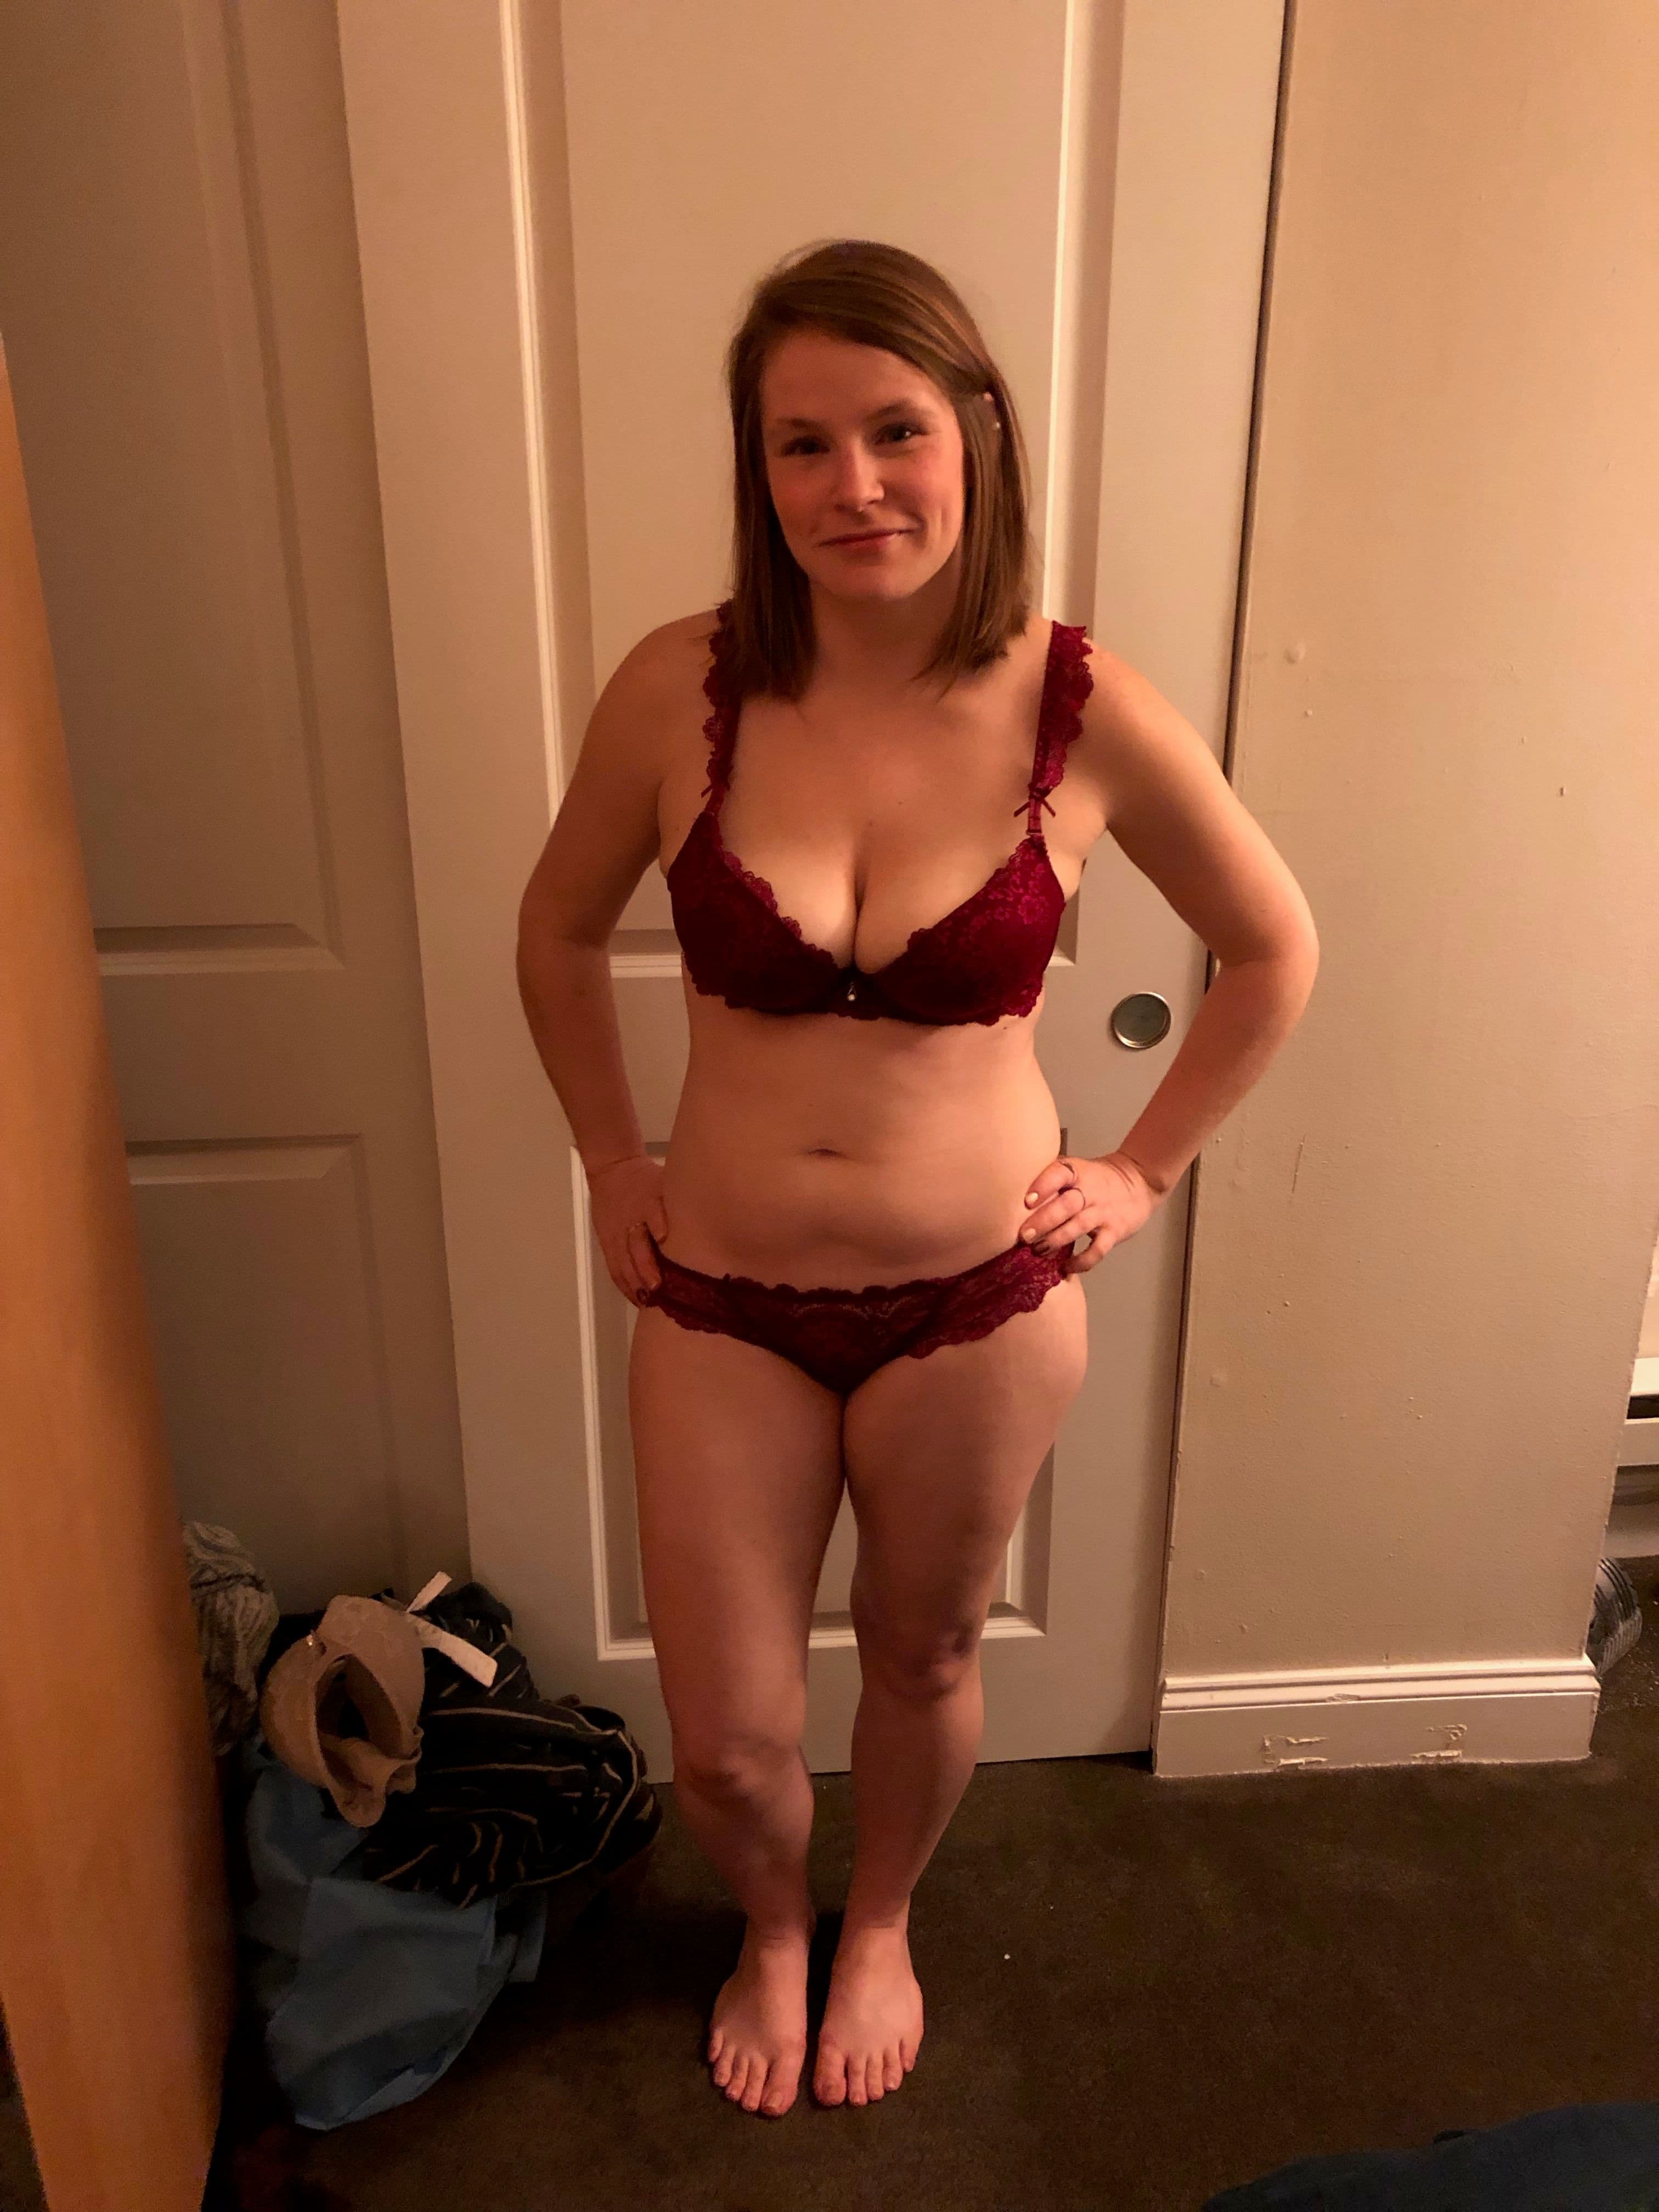 BBW Amateur Busty Shaved Chubby Fat Mature MILF with Saggy Tits Wearing Lingerie